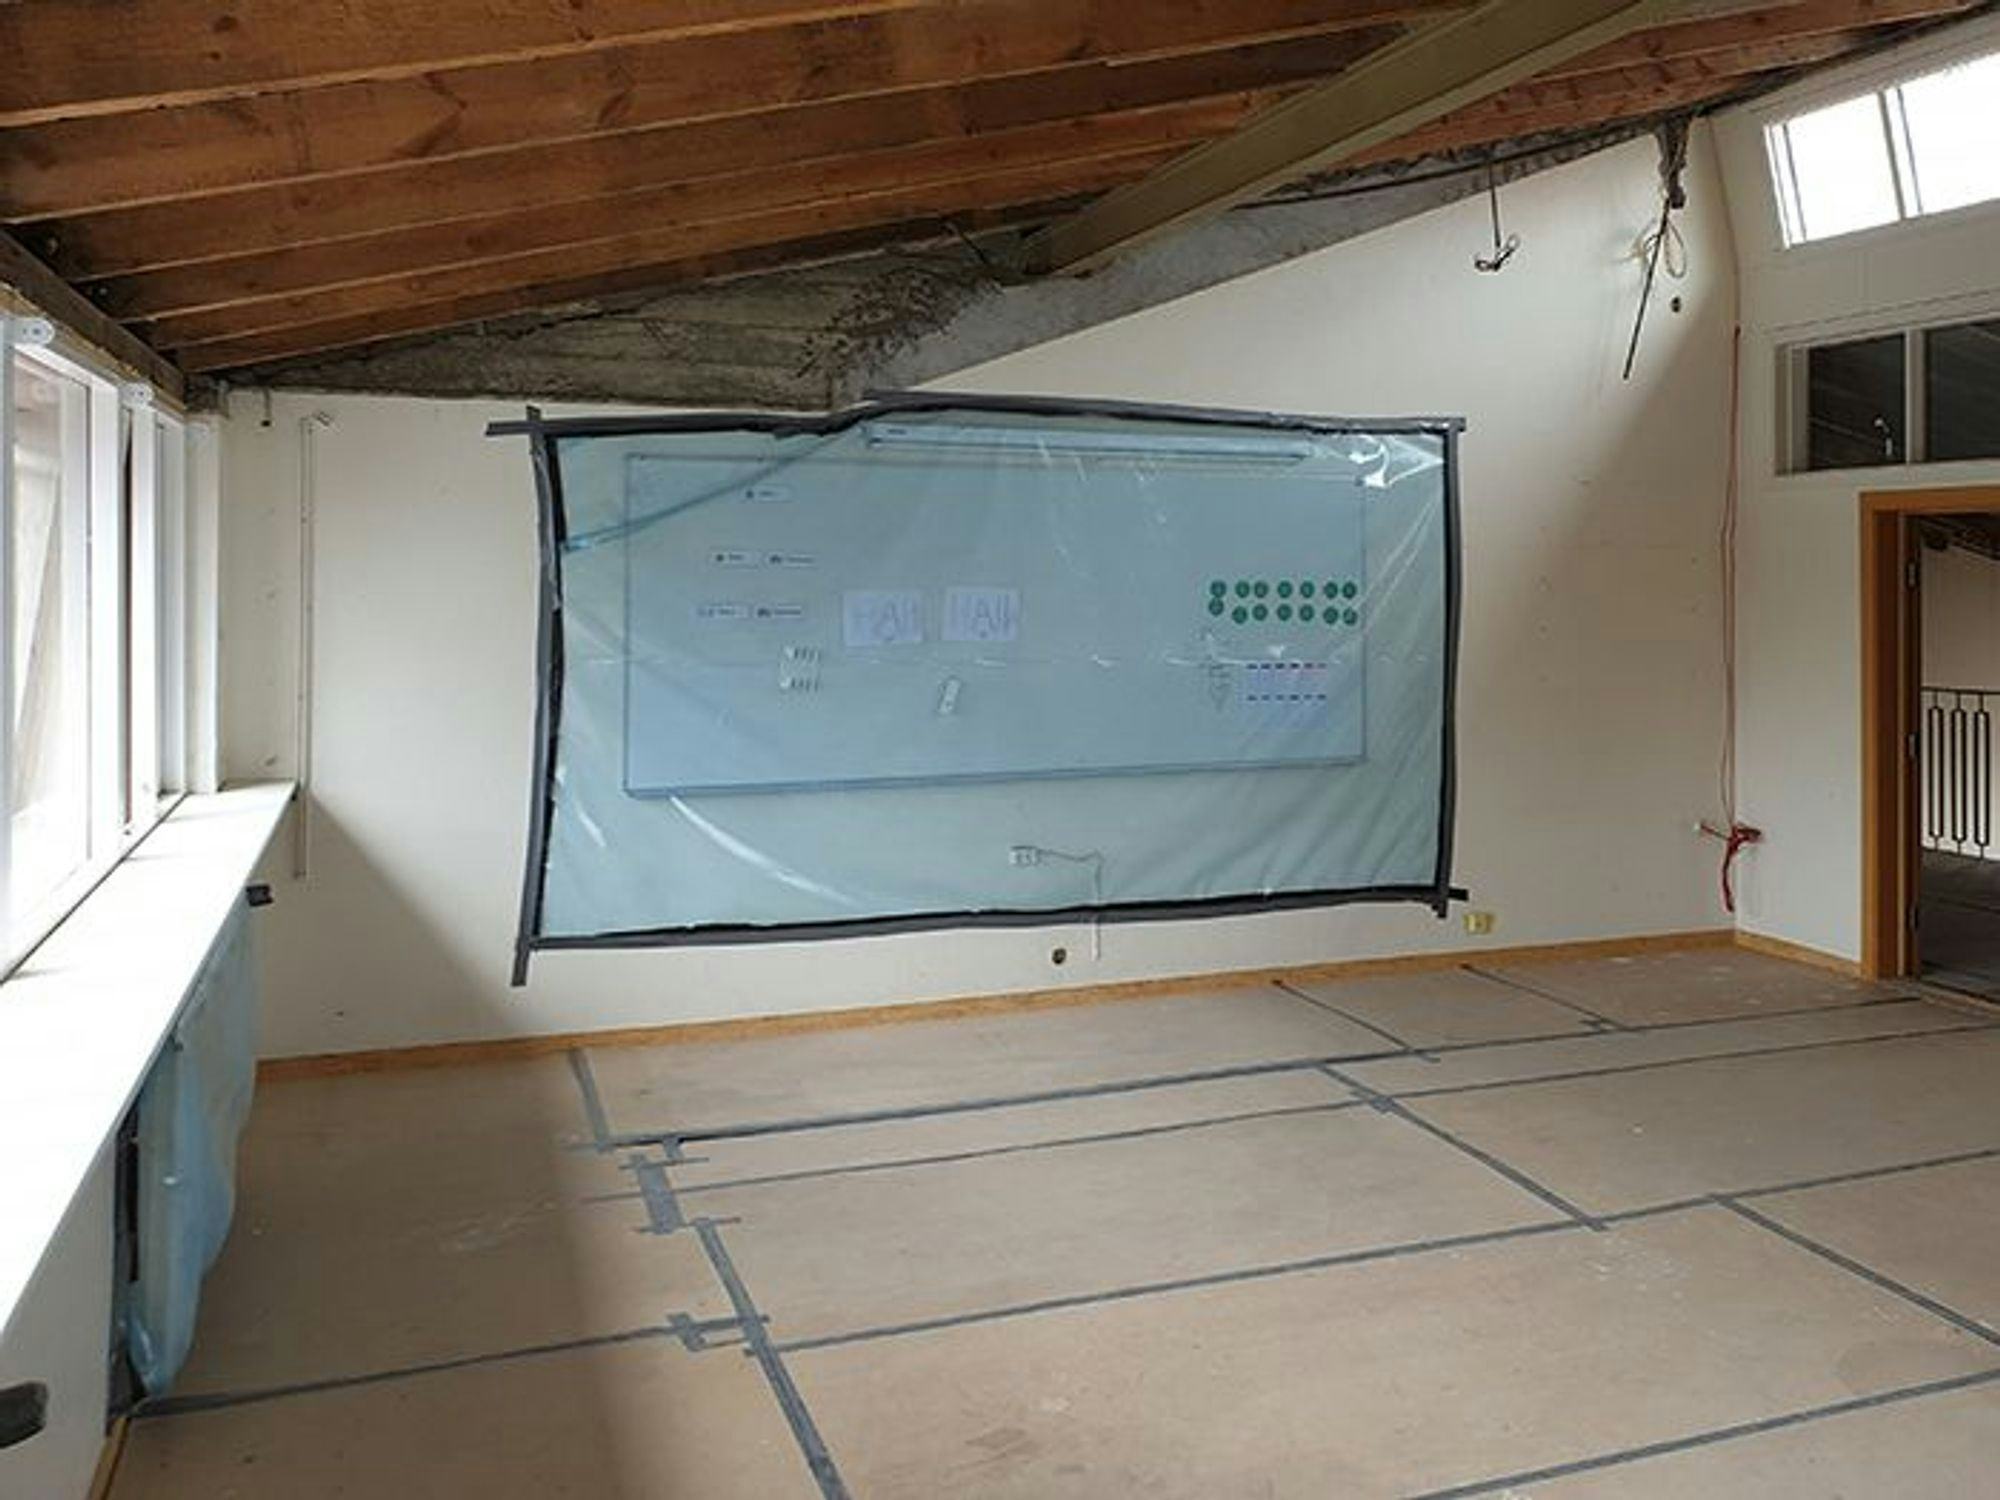 an interior space of a room under construction, with insulation material visible 